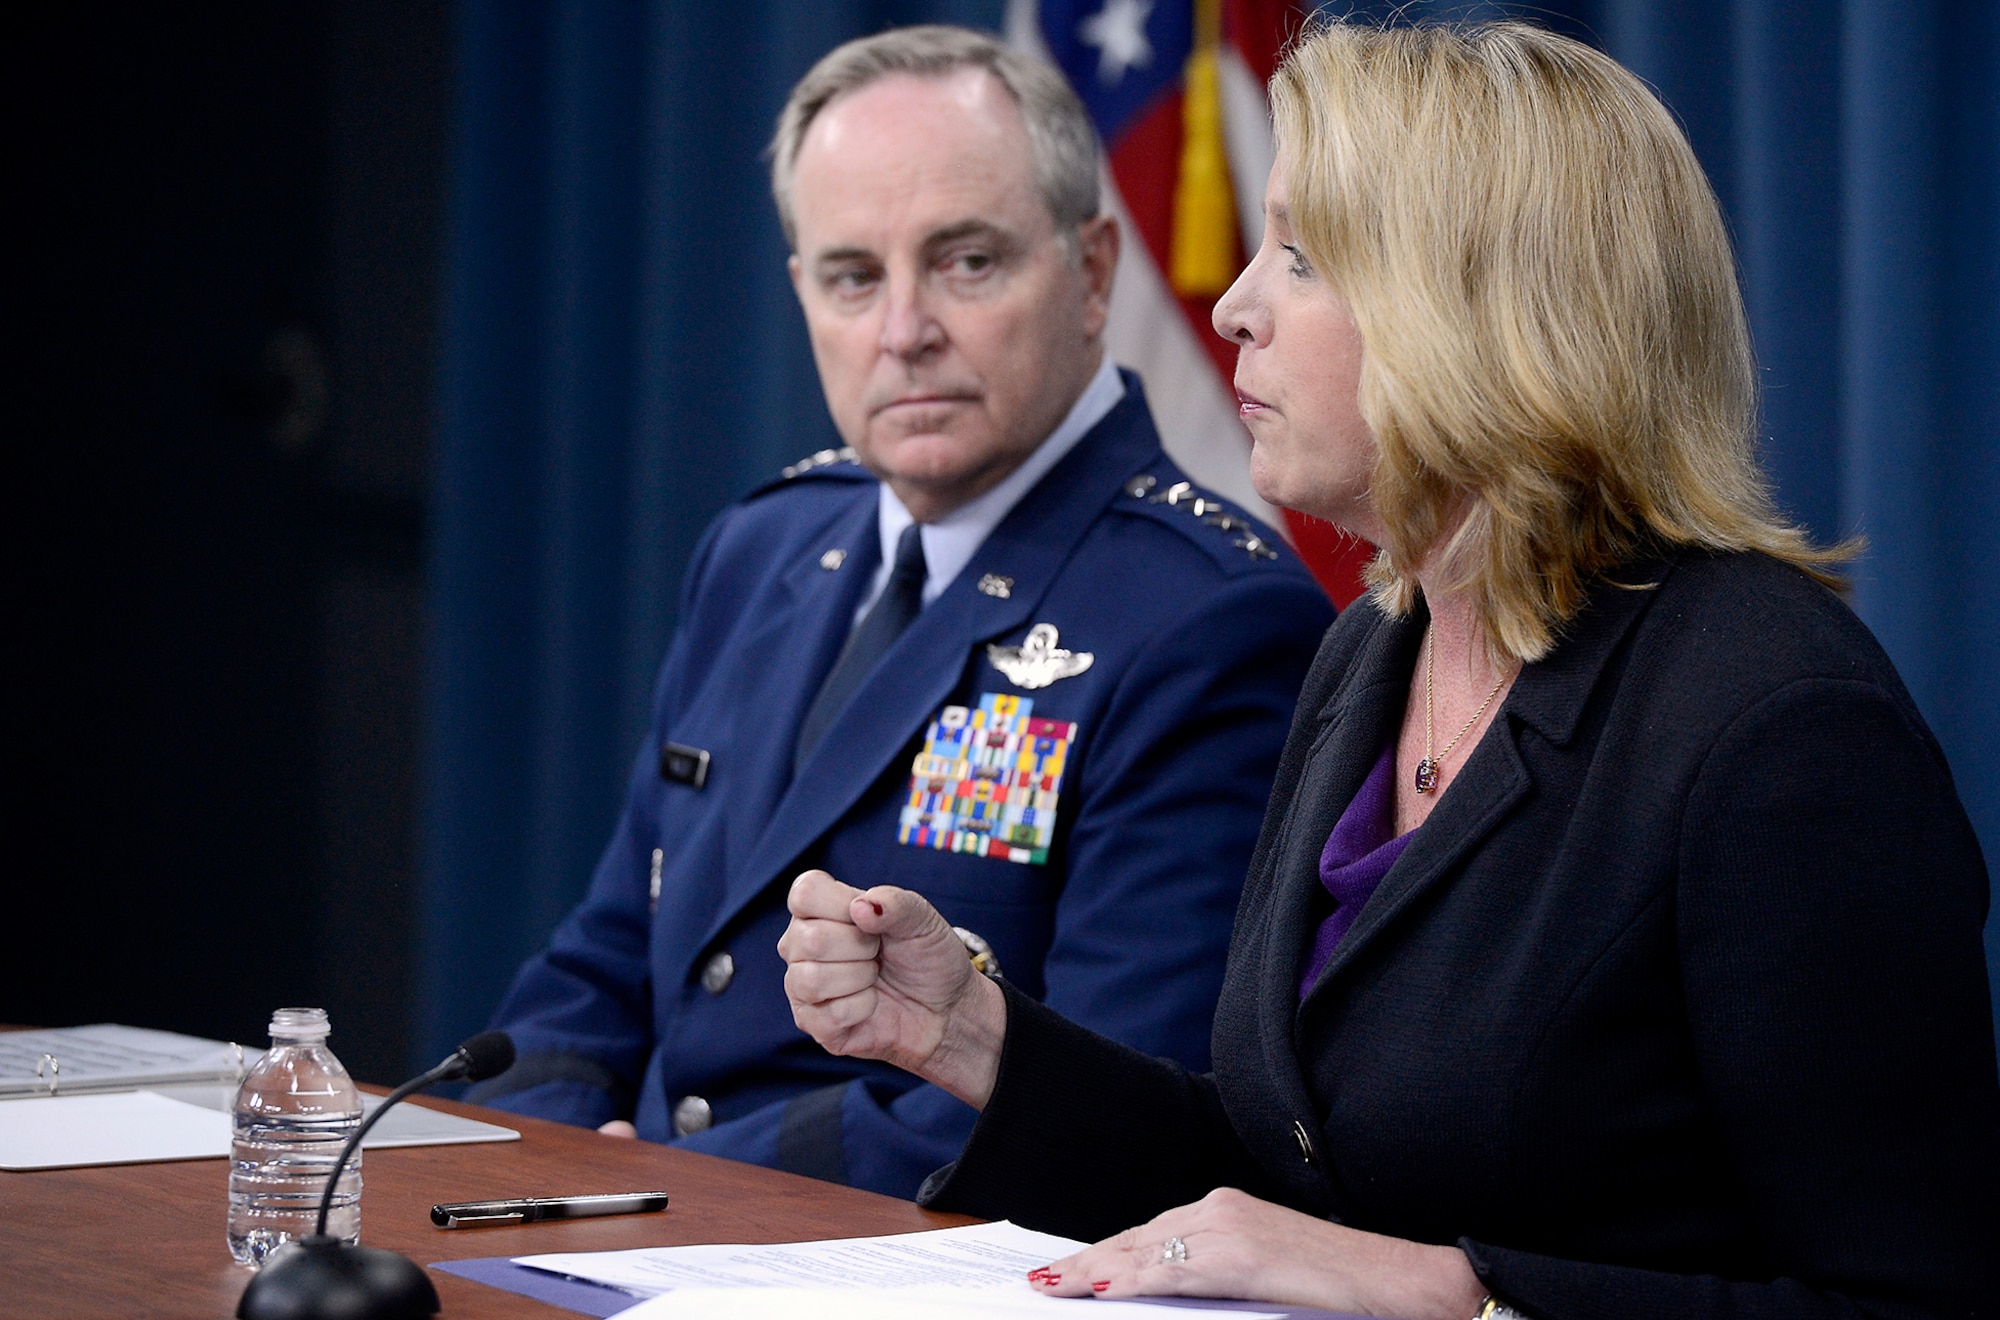 Secretary of the Air Force Deborah Lee James and Air Force Chief of Staff Gen. Mark A. Welsh III deliver their "State of the Air Force" message during a Pentagon press conference July 30, 2014. They unveiled the Air Force's strategy, "America's Air Force: A call to the Future." (U.S. Air Force photo/Scott M. Ash)